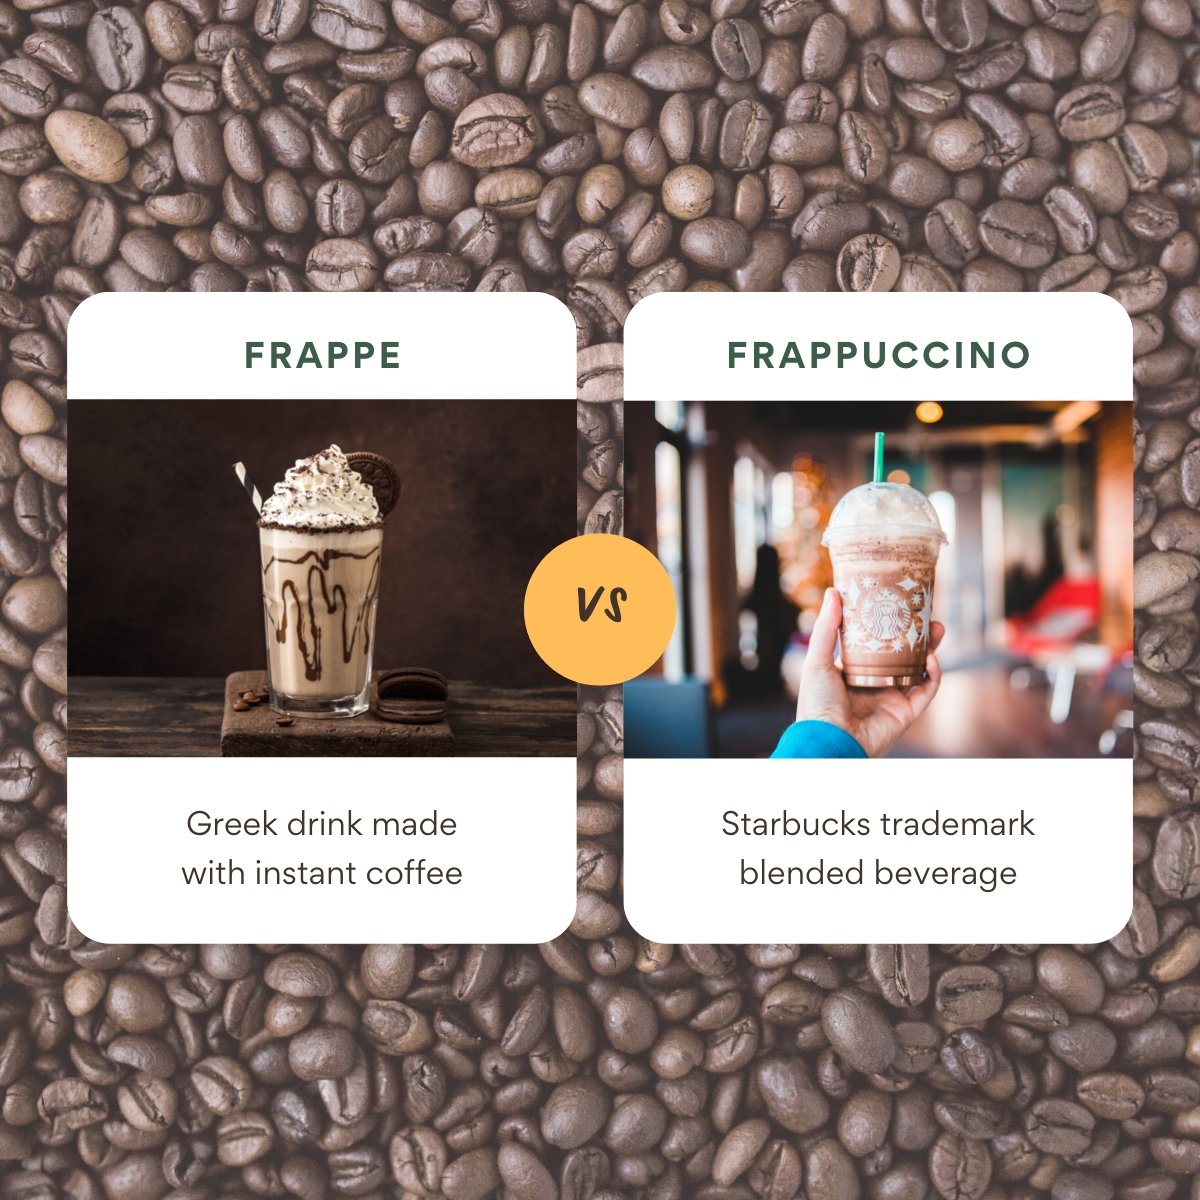 greek frappe vs starbucks frappuccino side by side comparison with text on image